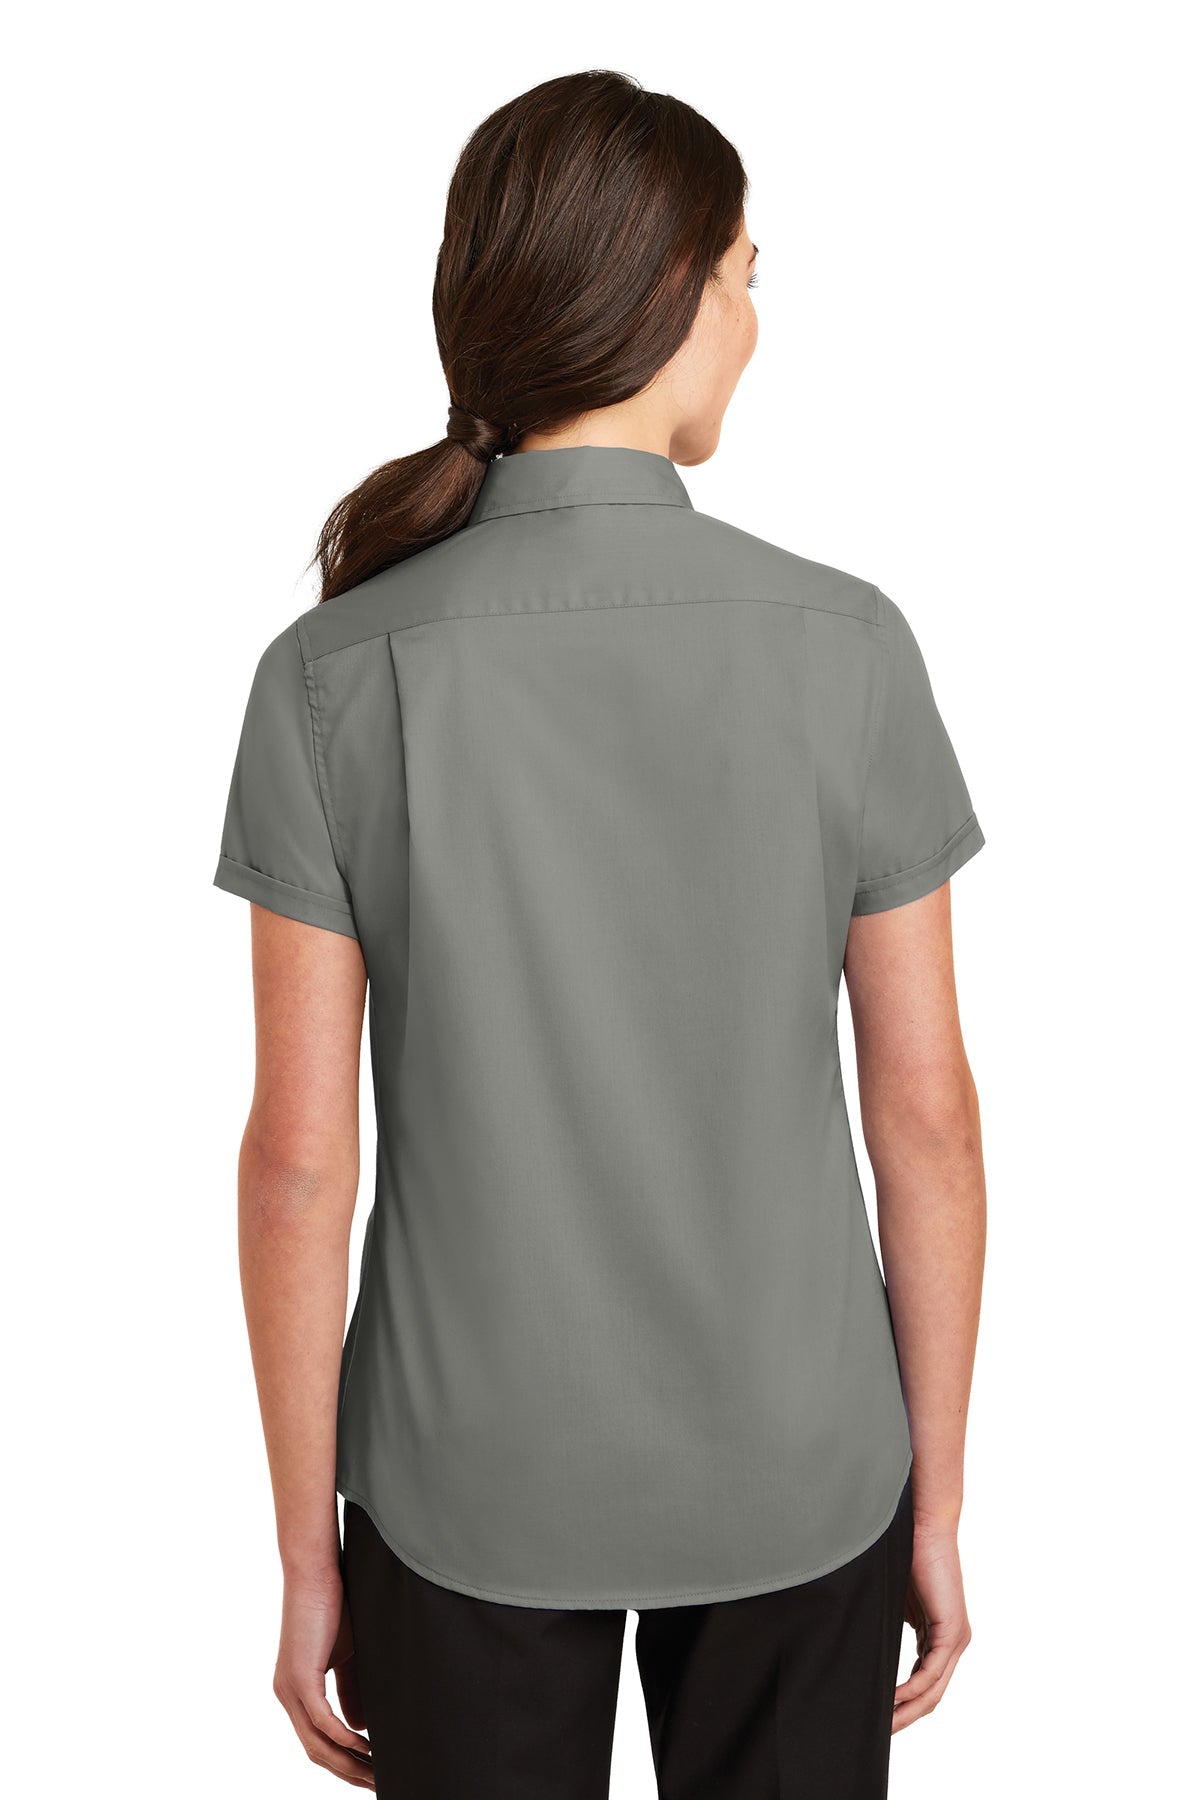 port authority_l664 _monument grey_company_logo_button downs